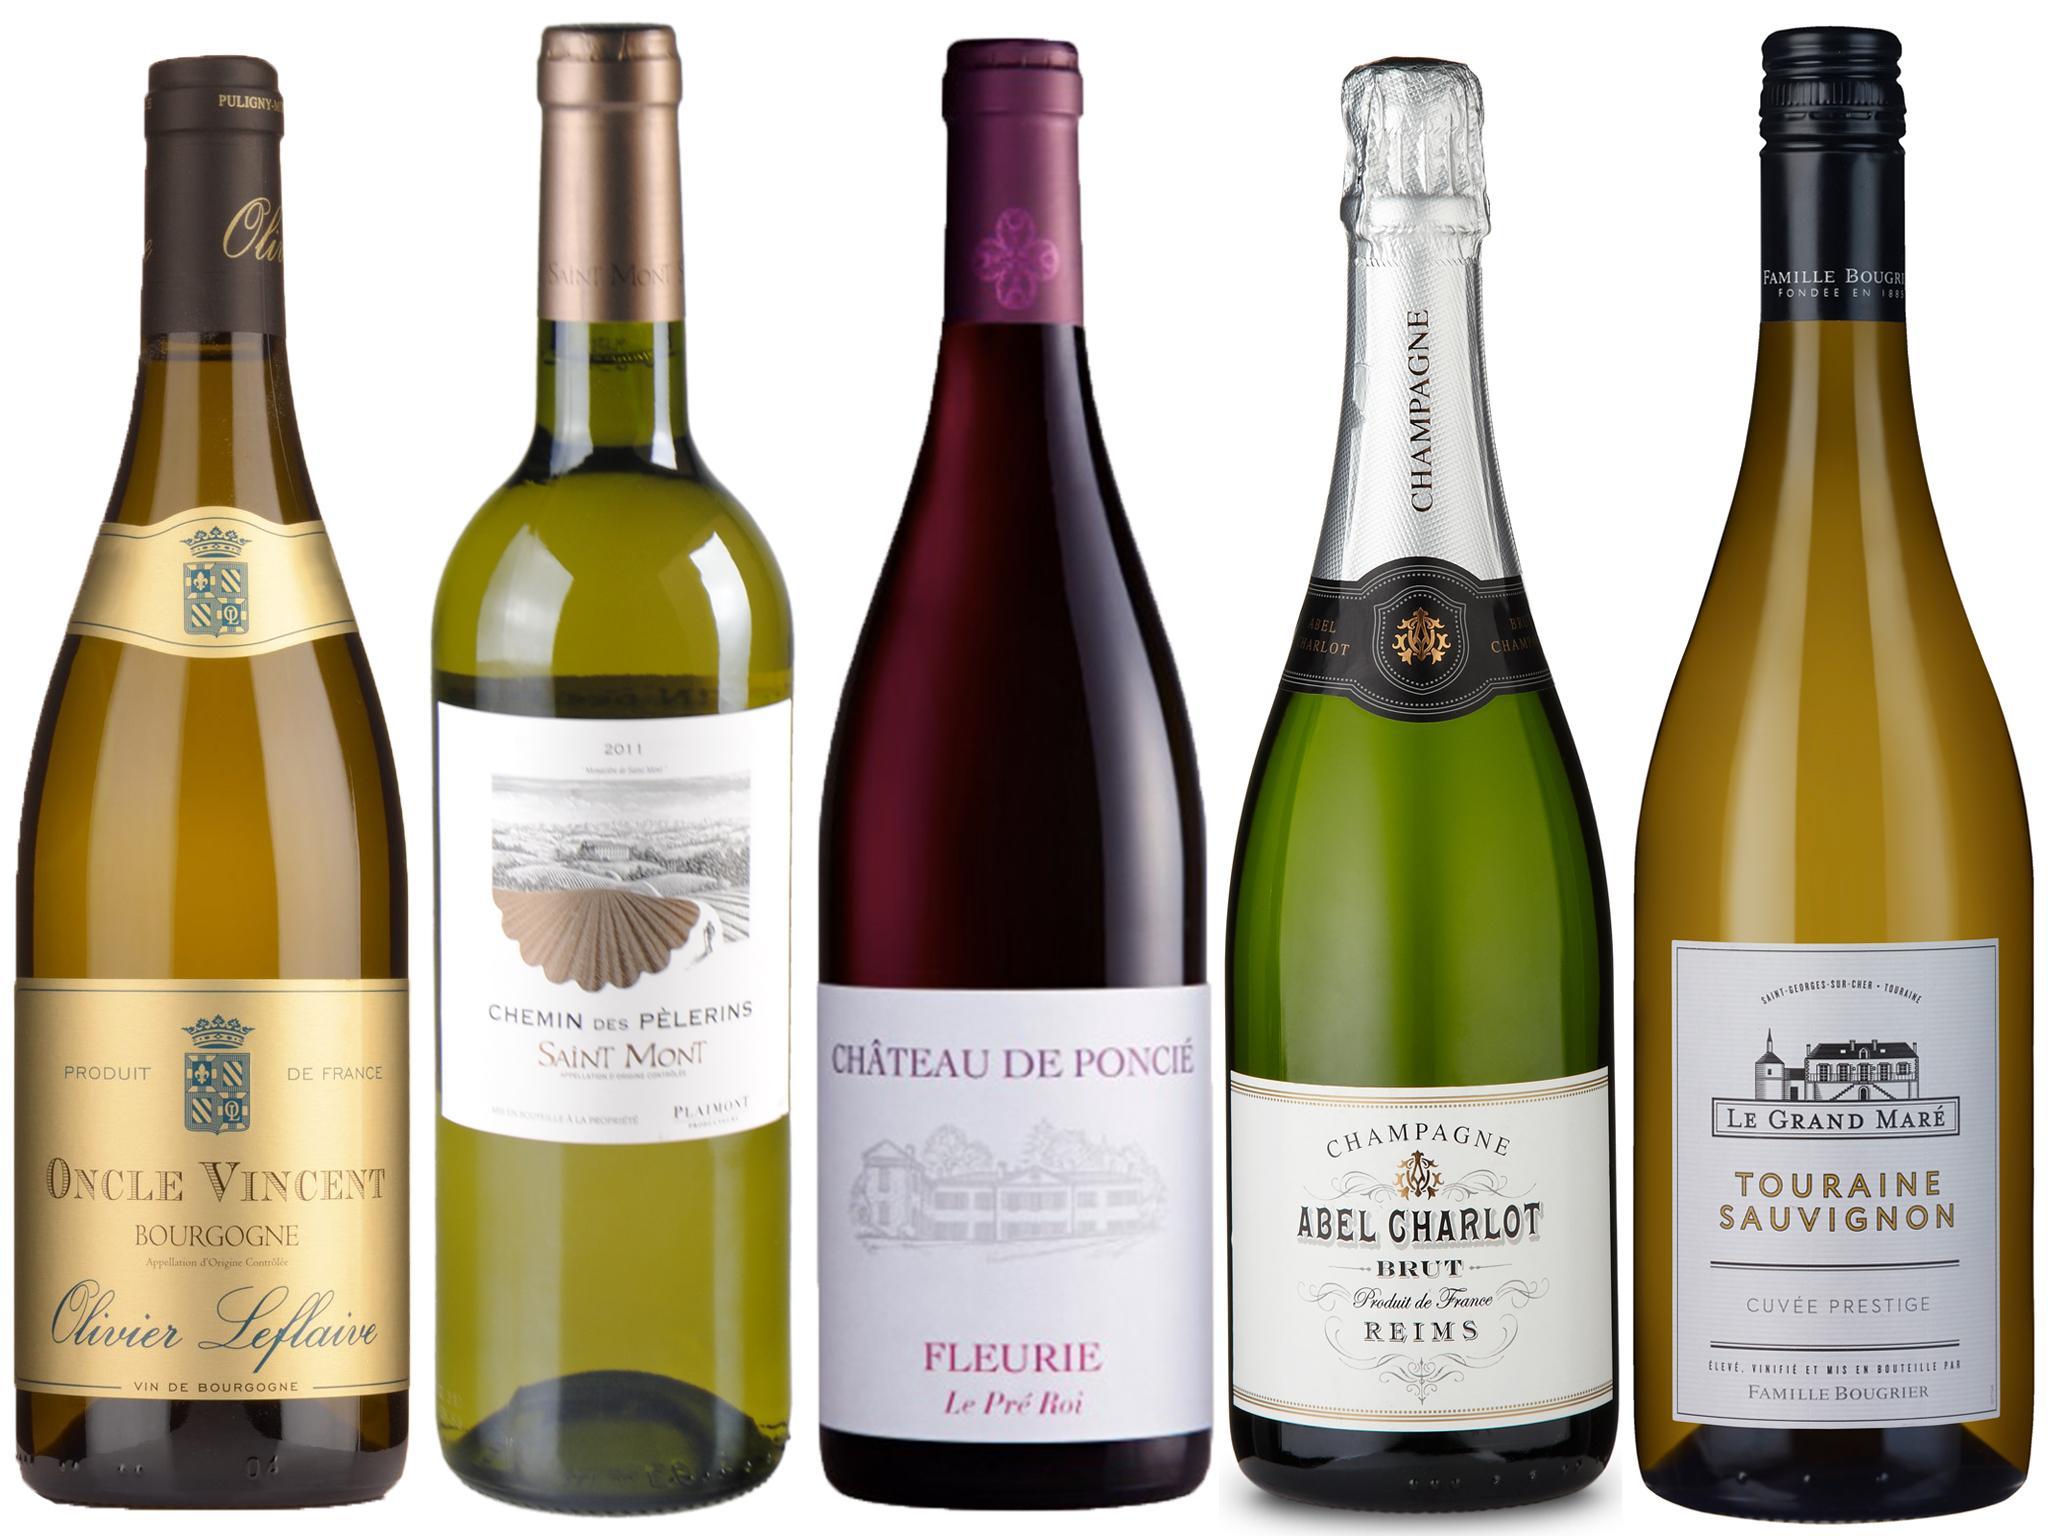 ‘One of the joys of France wines is the unexpected oddities and rarities that occur’